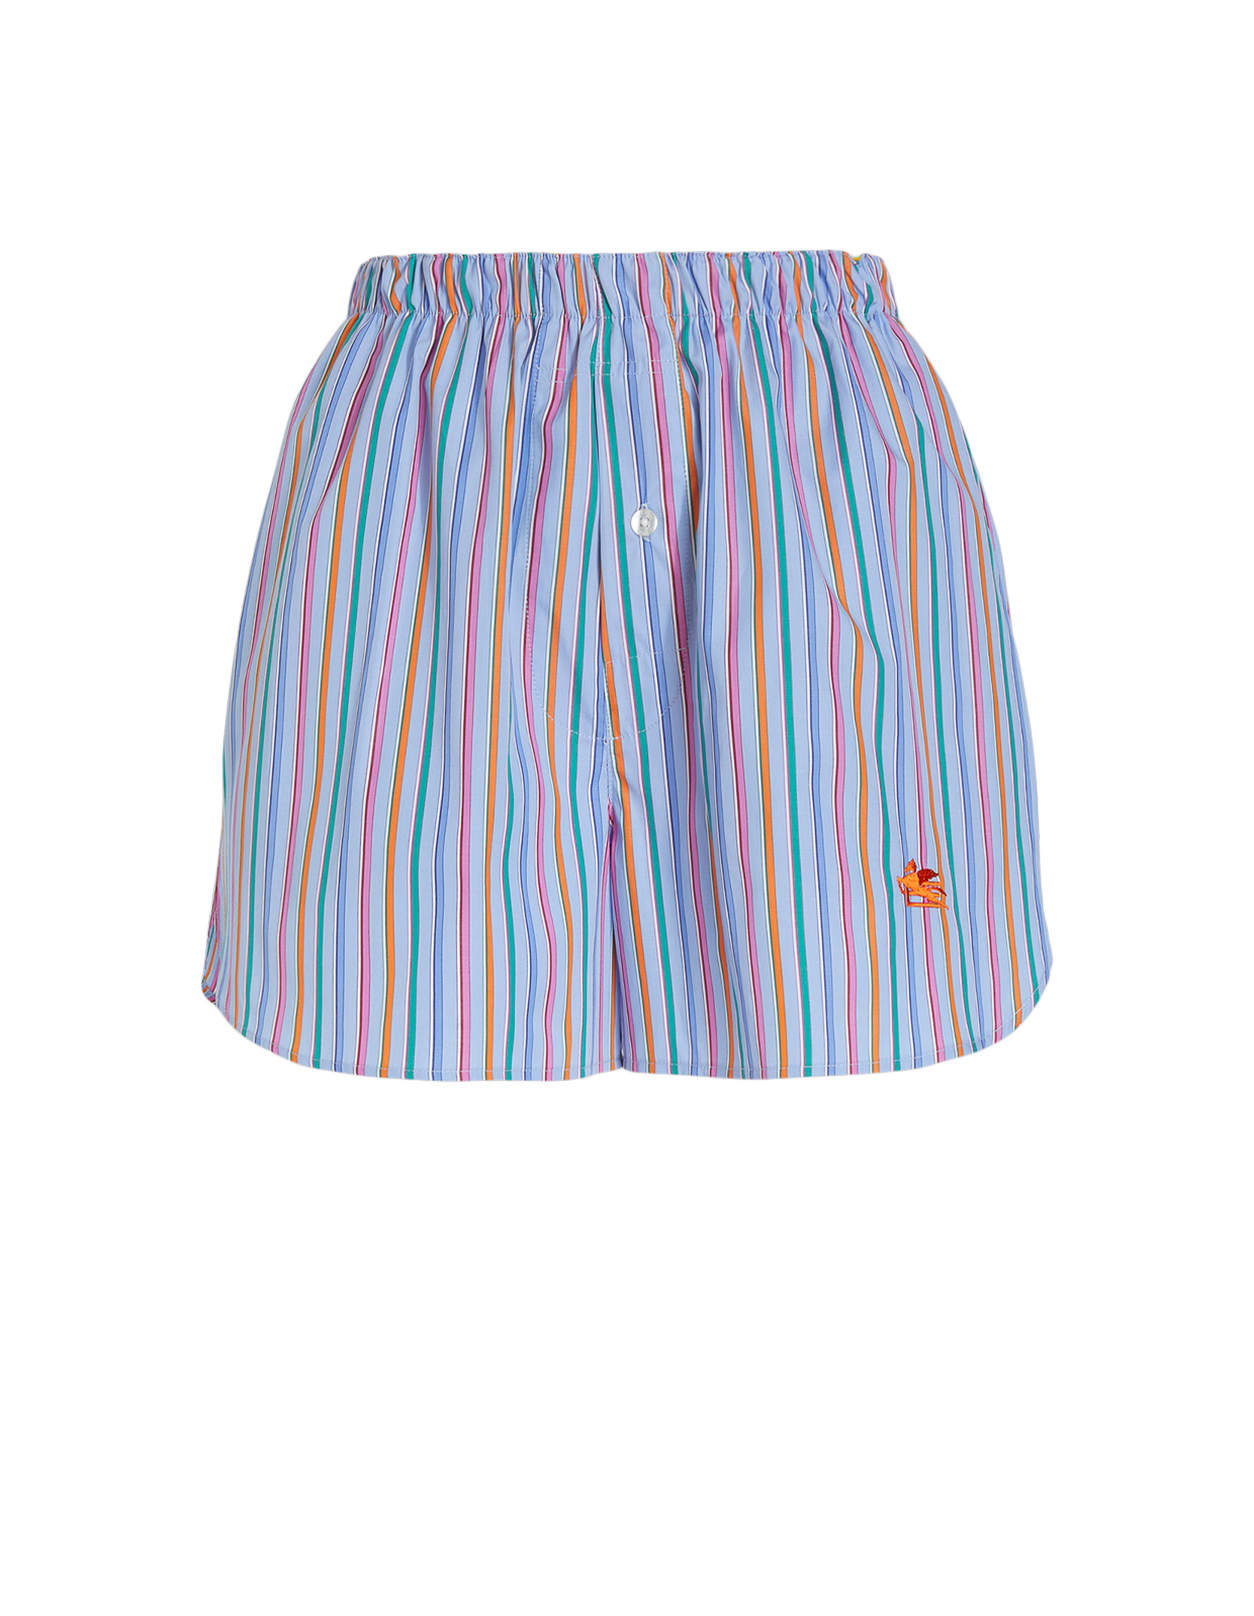 Etro Woman Light Blue Shorts With Multicolored Stripes